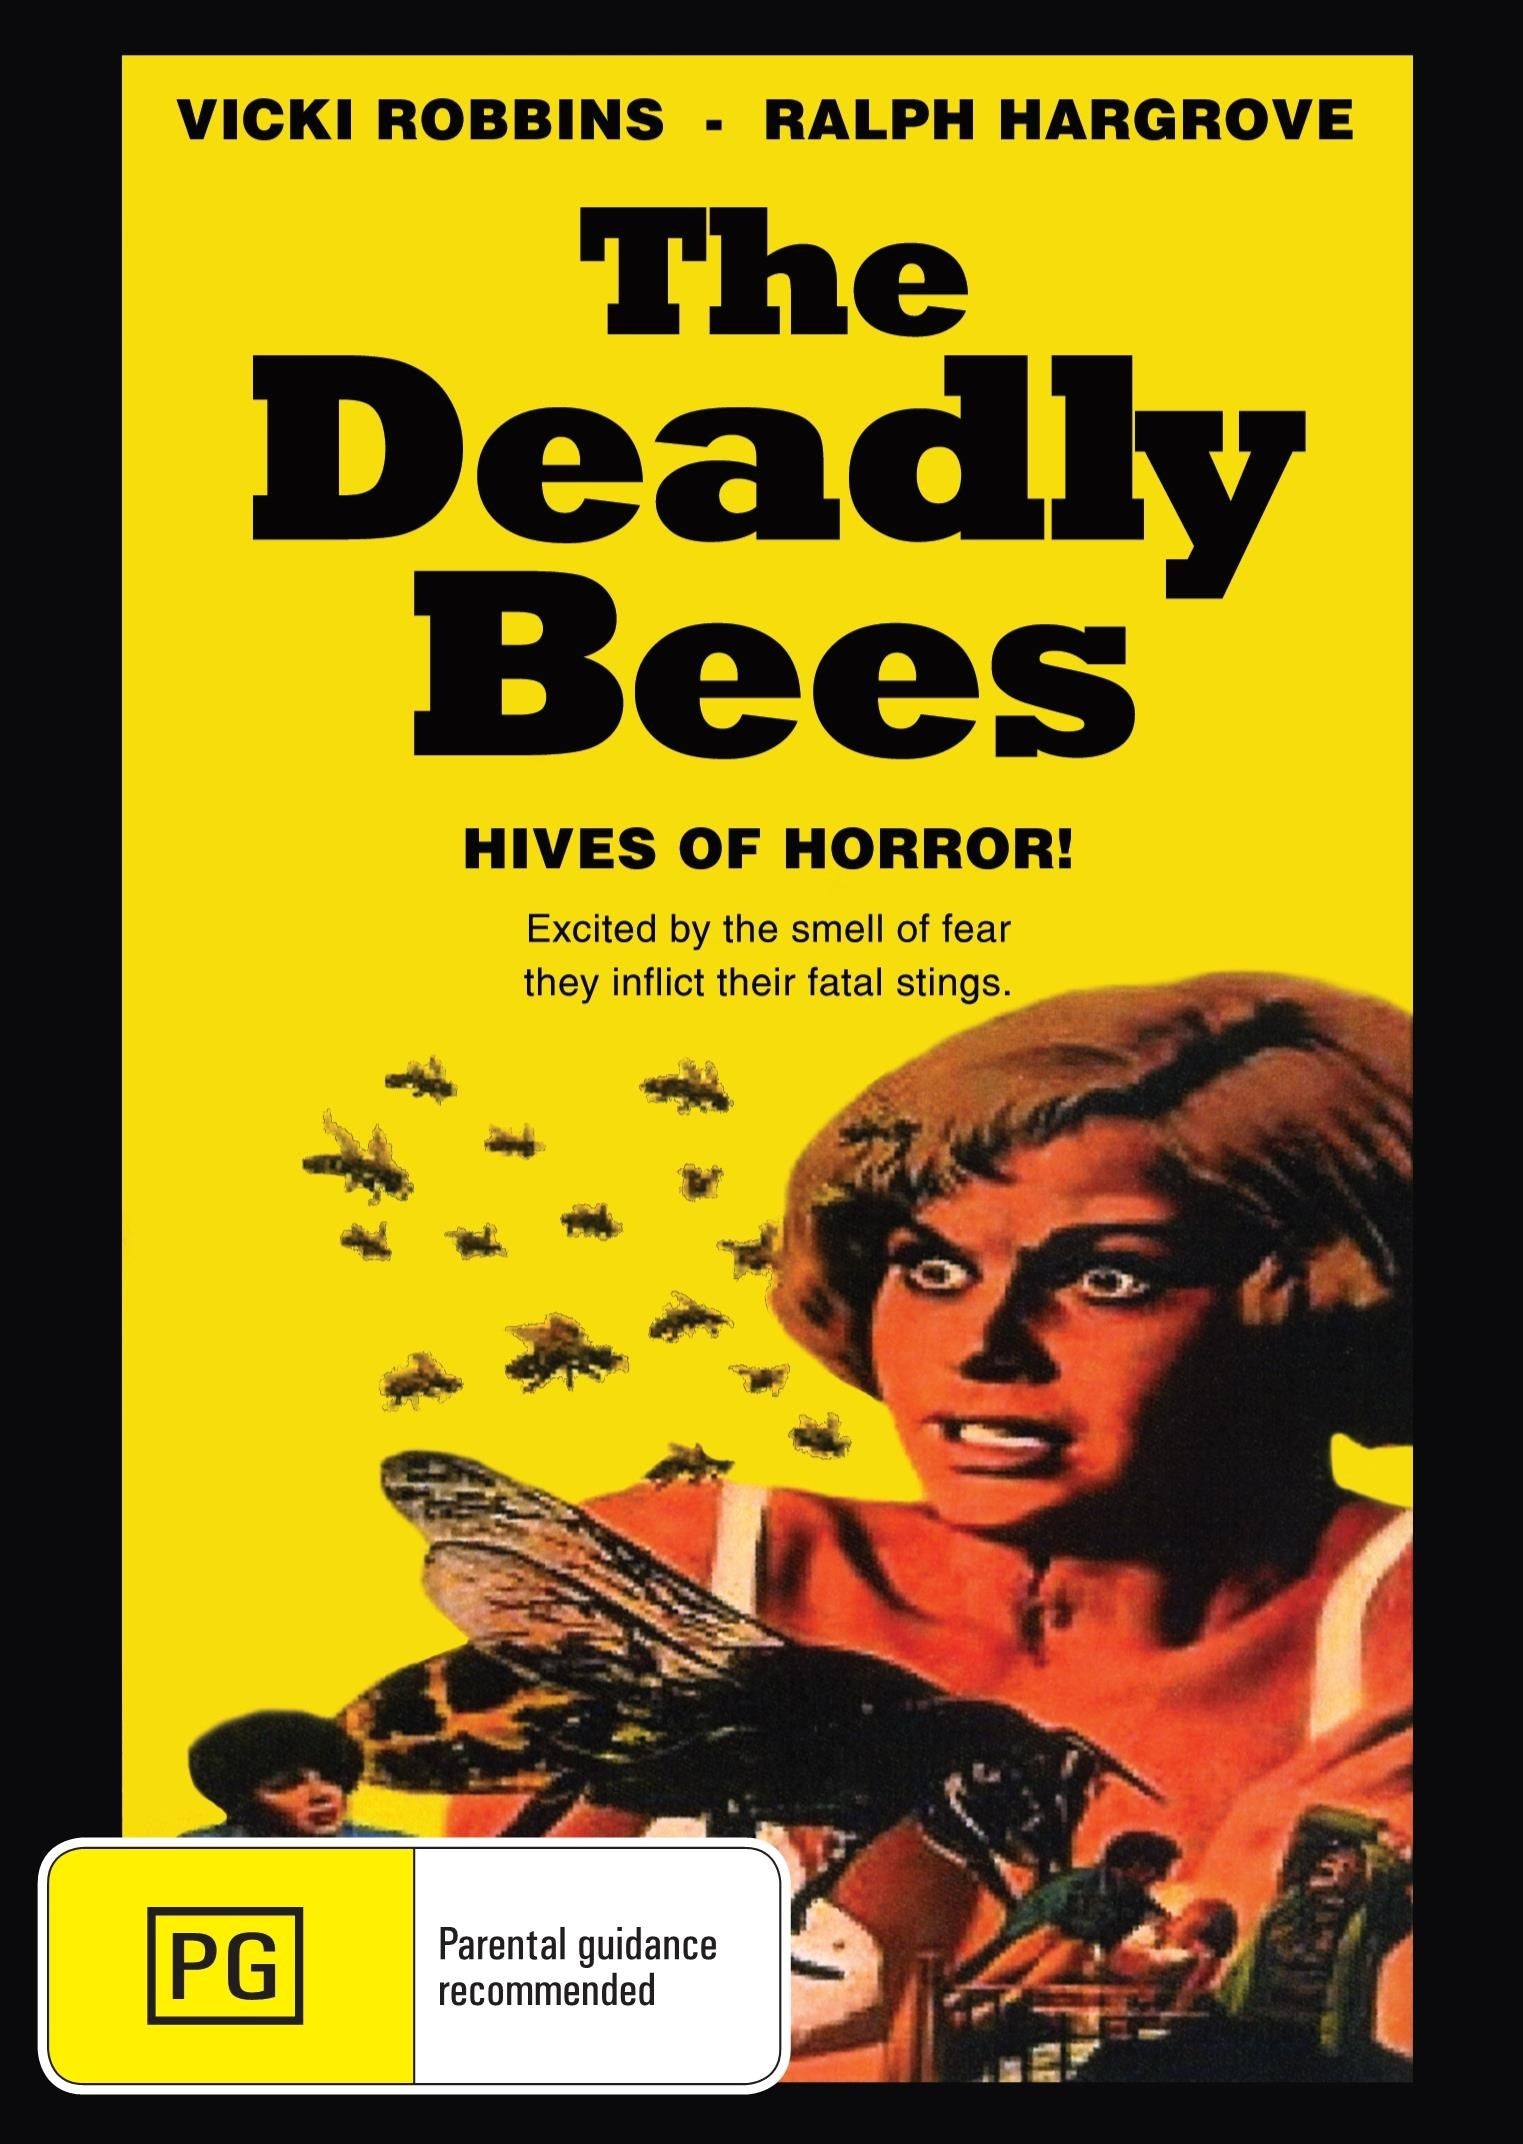 The Deadly Bees rareandcollectibledvds